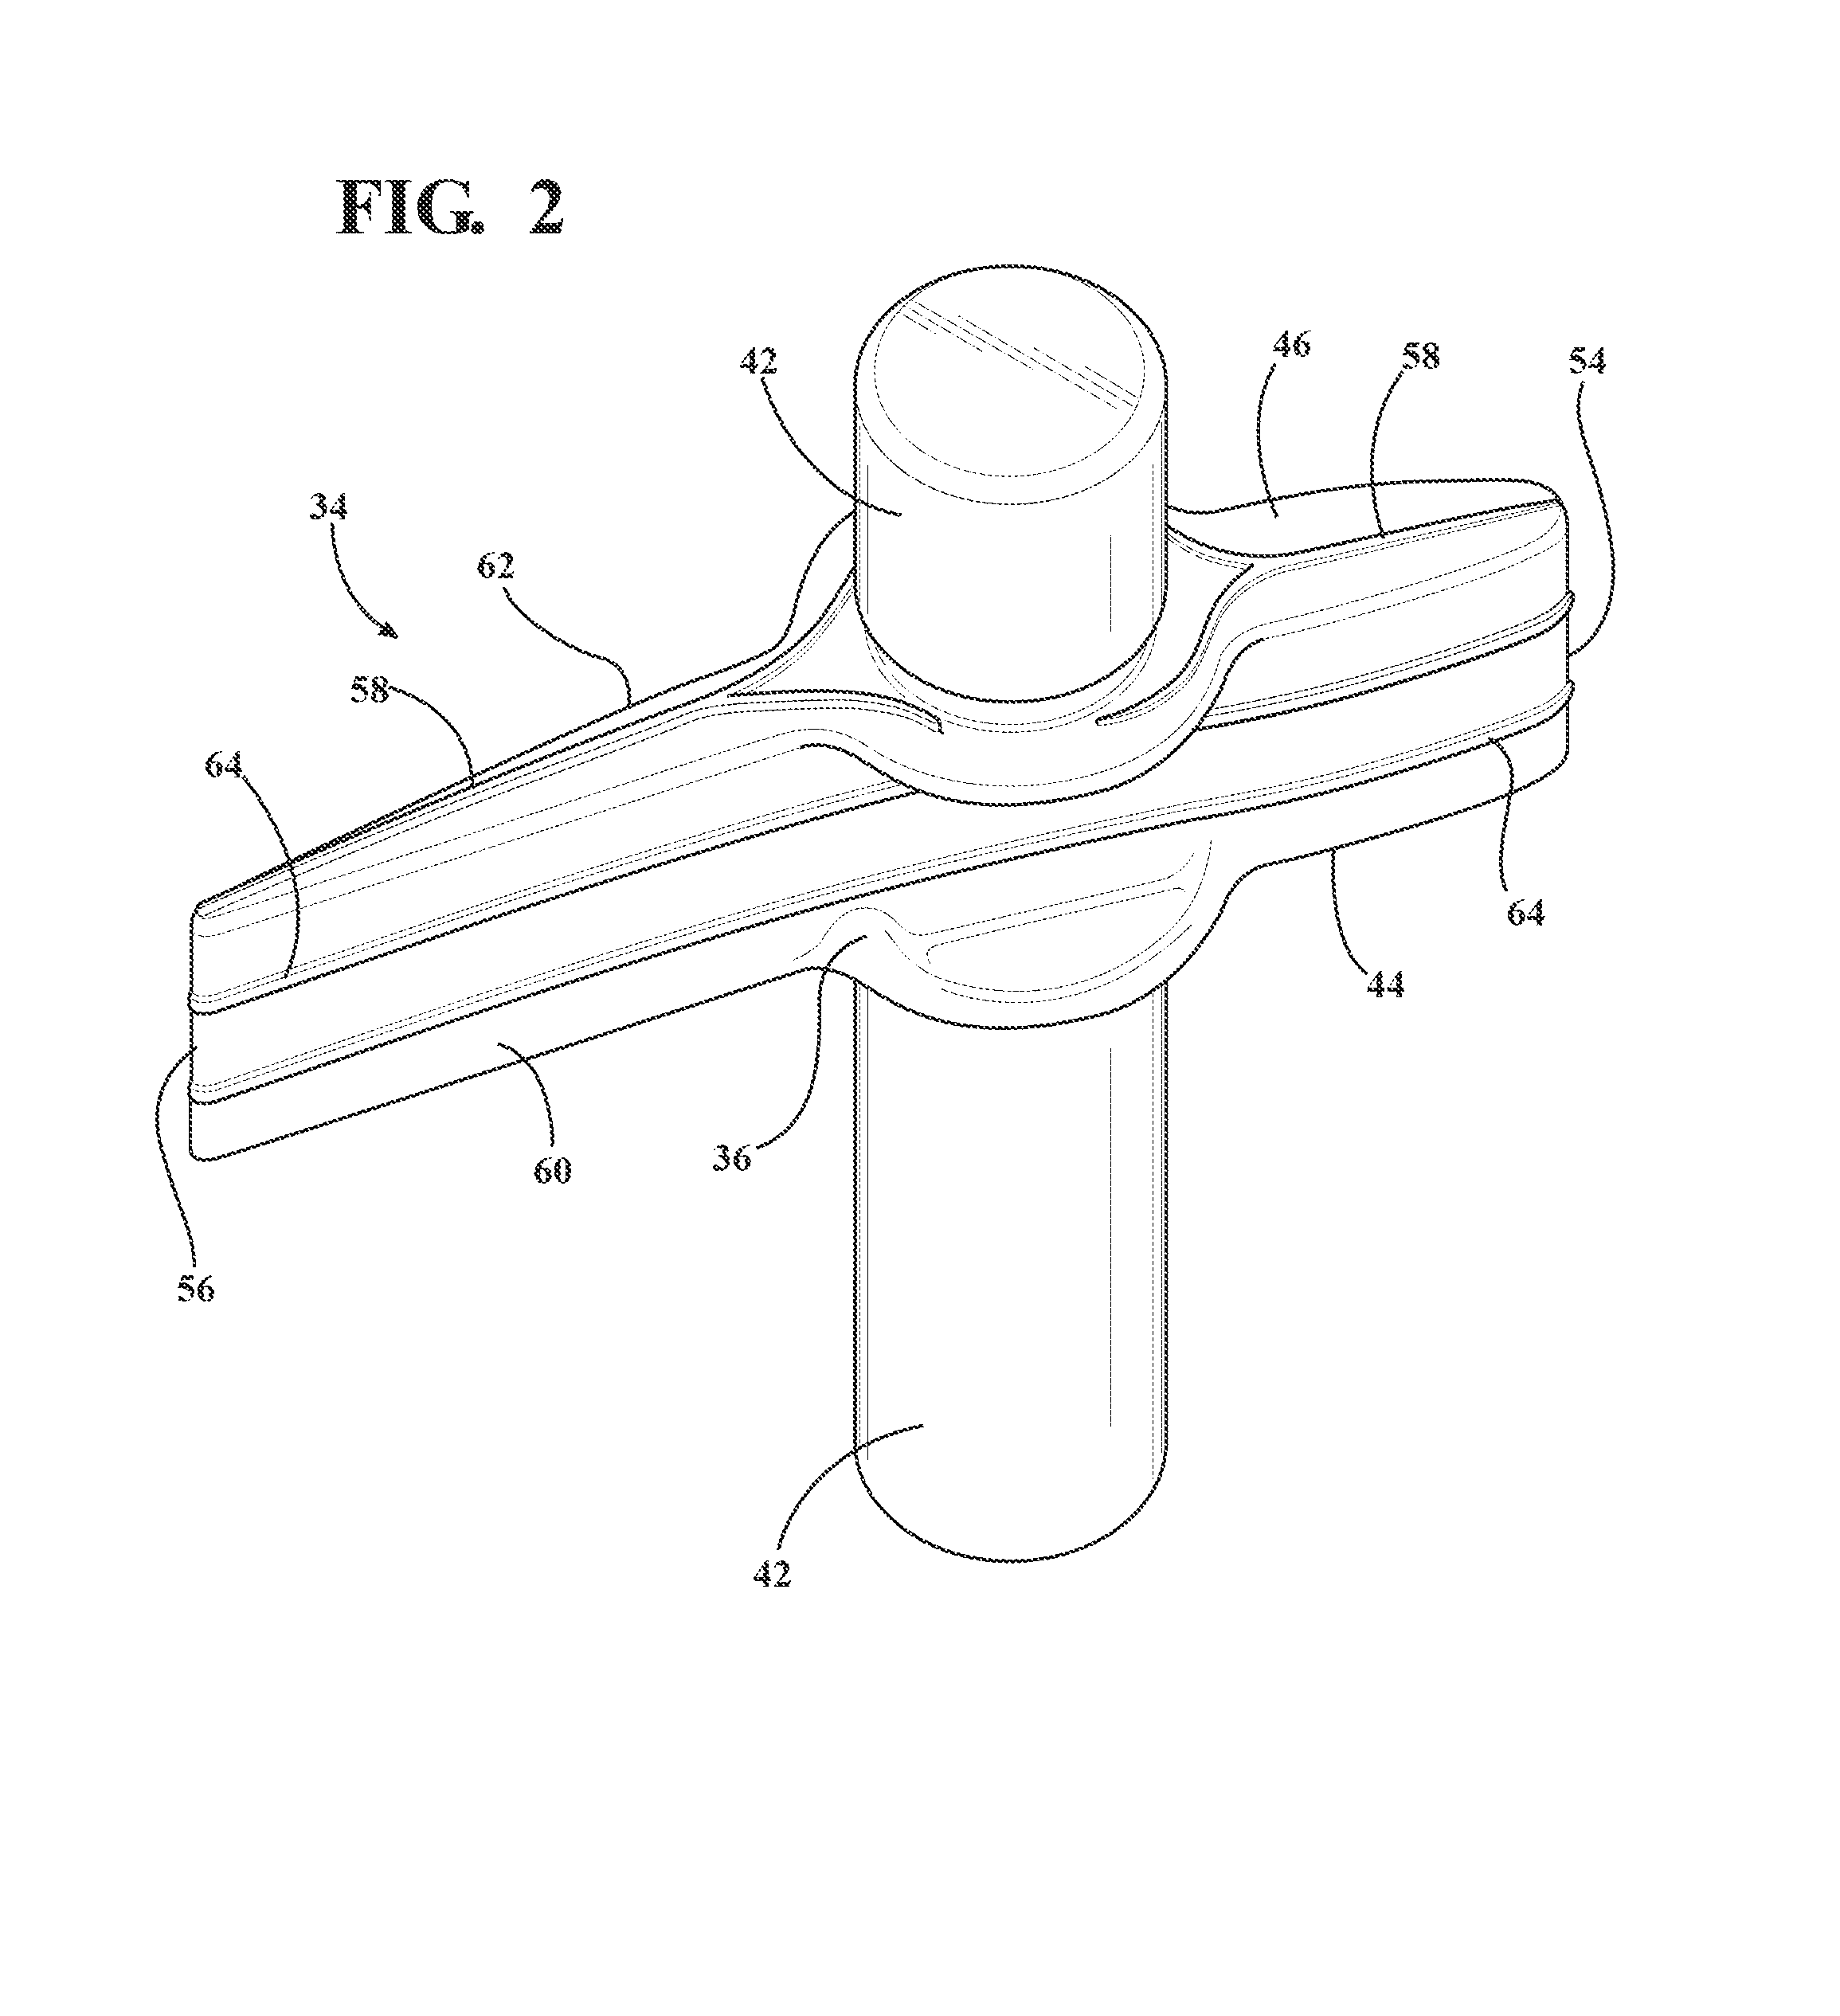 Turbocharger with variable turbine geometry having grooved guide vanes